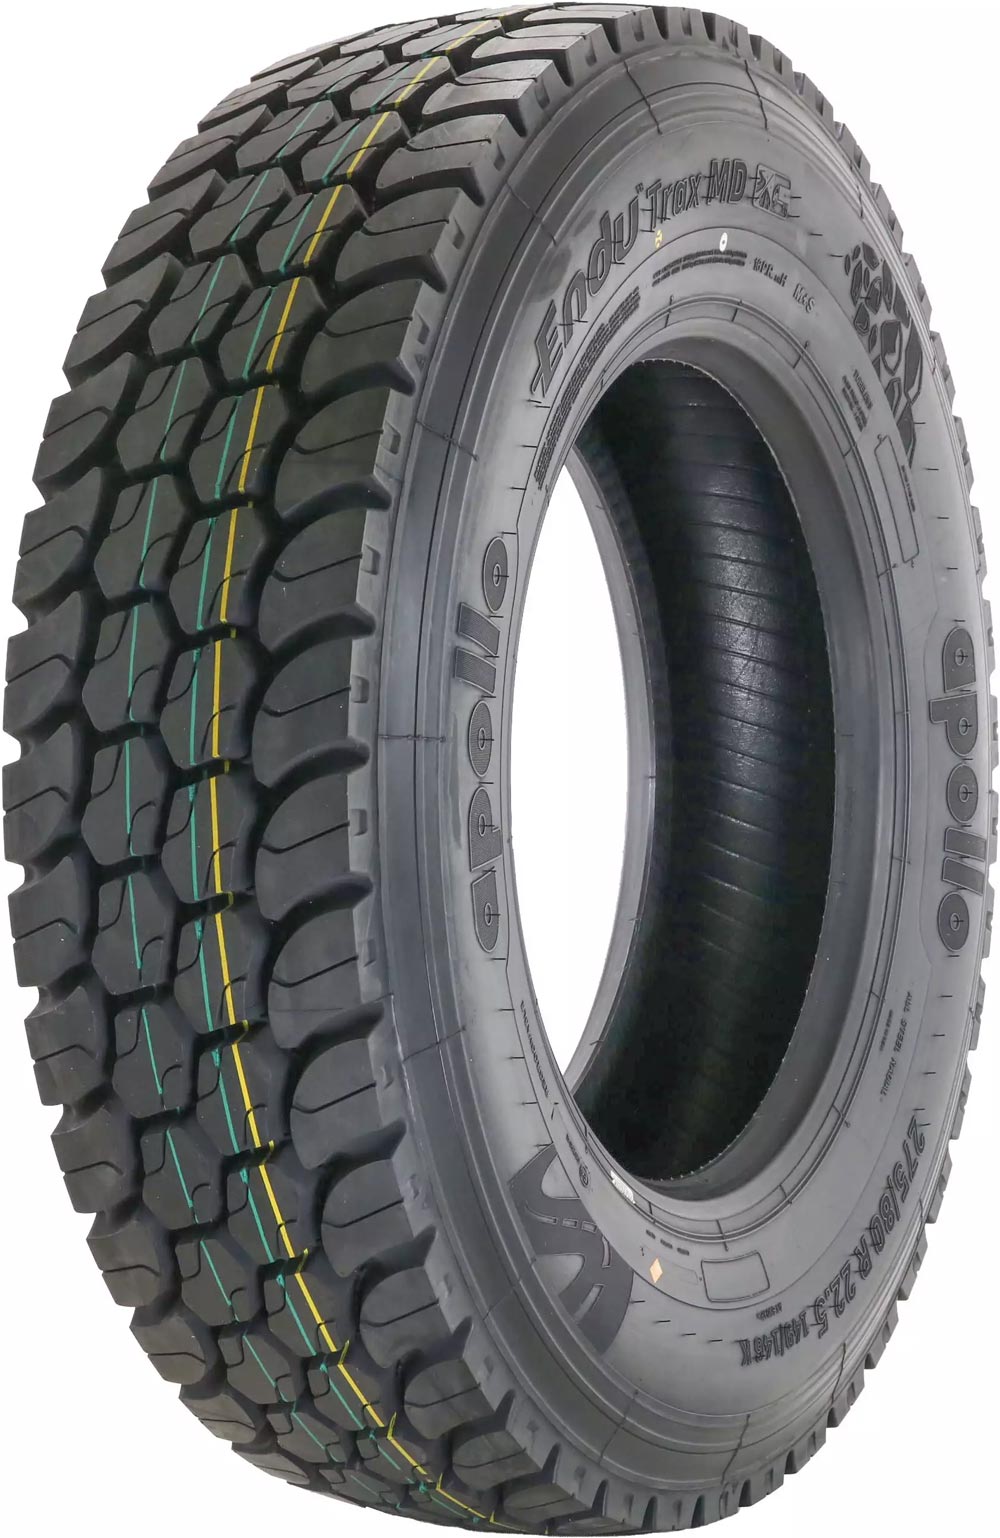 product_type-heavy_tires APOLLO EnduTrax MD 315/80 R22.5 156K